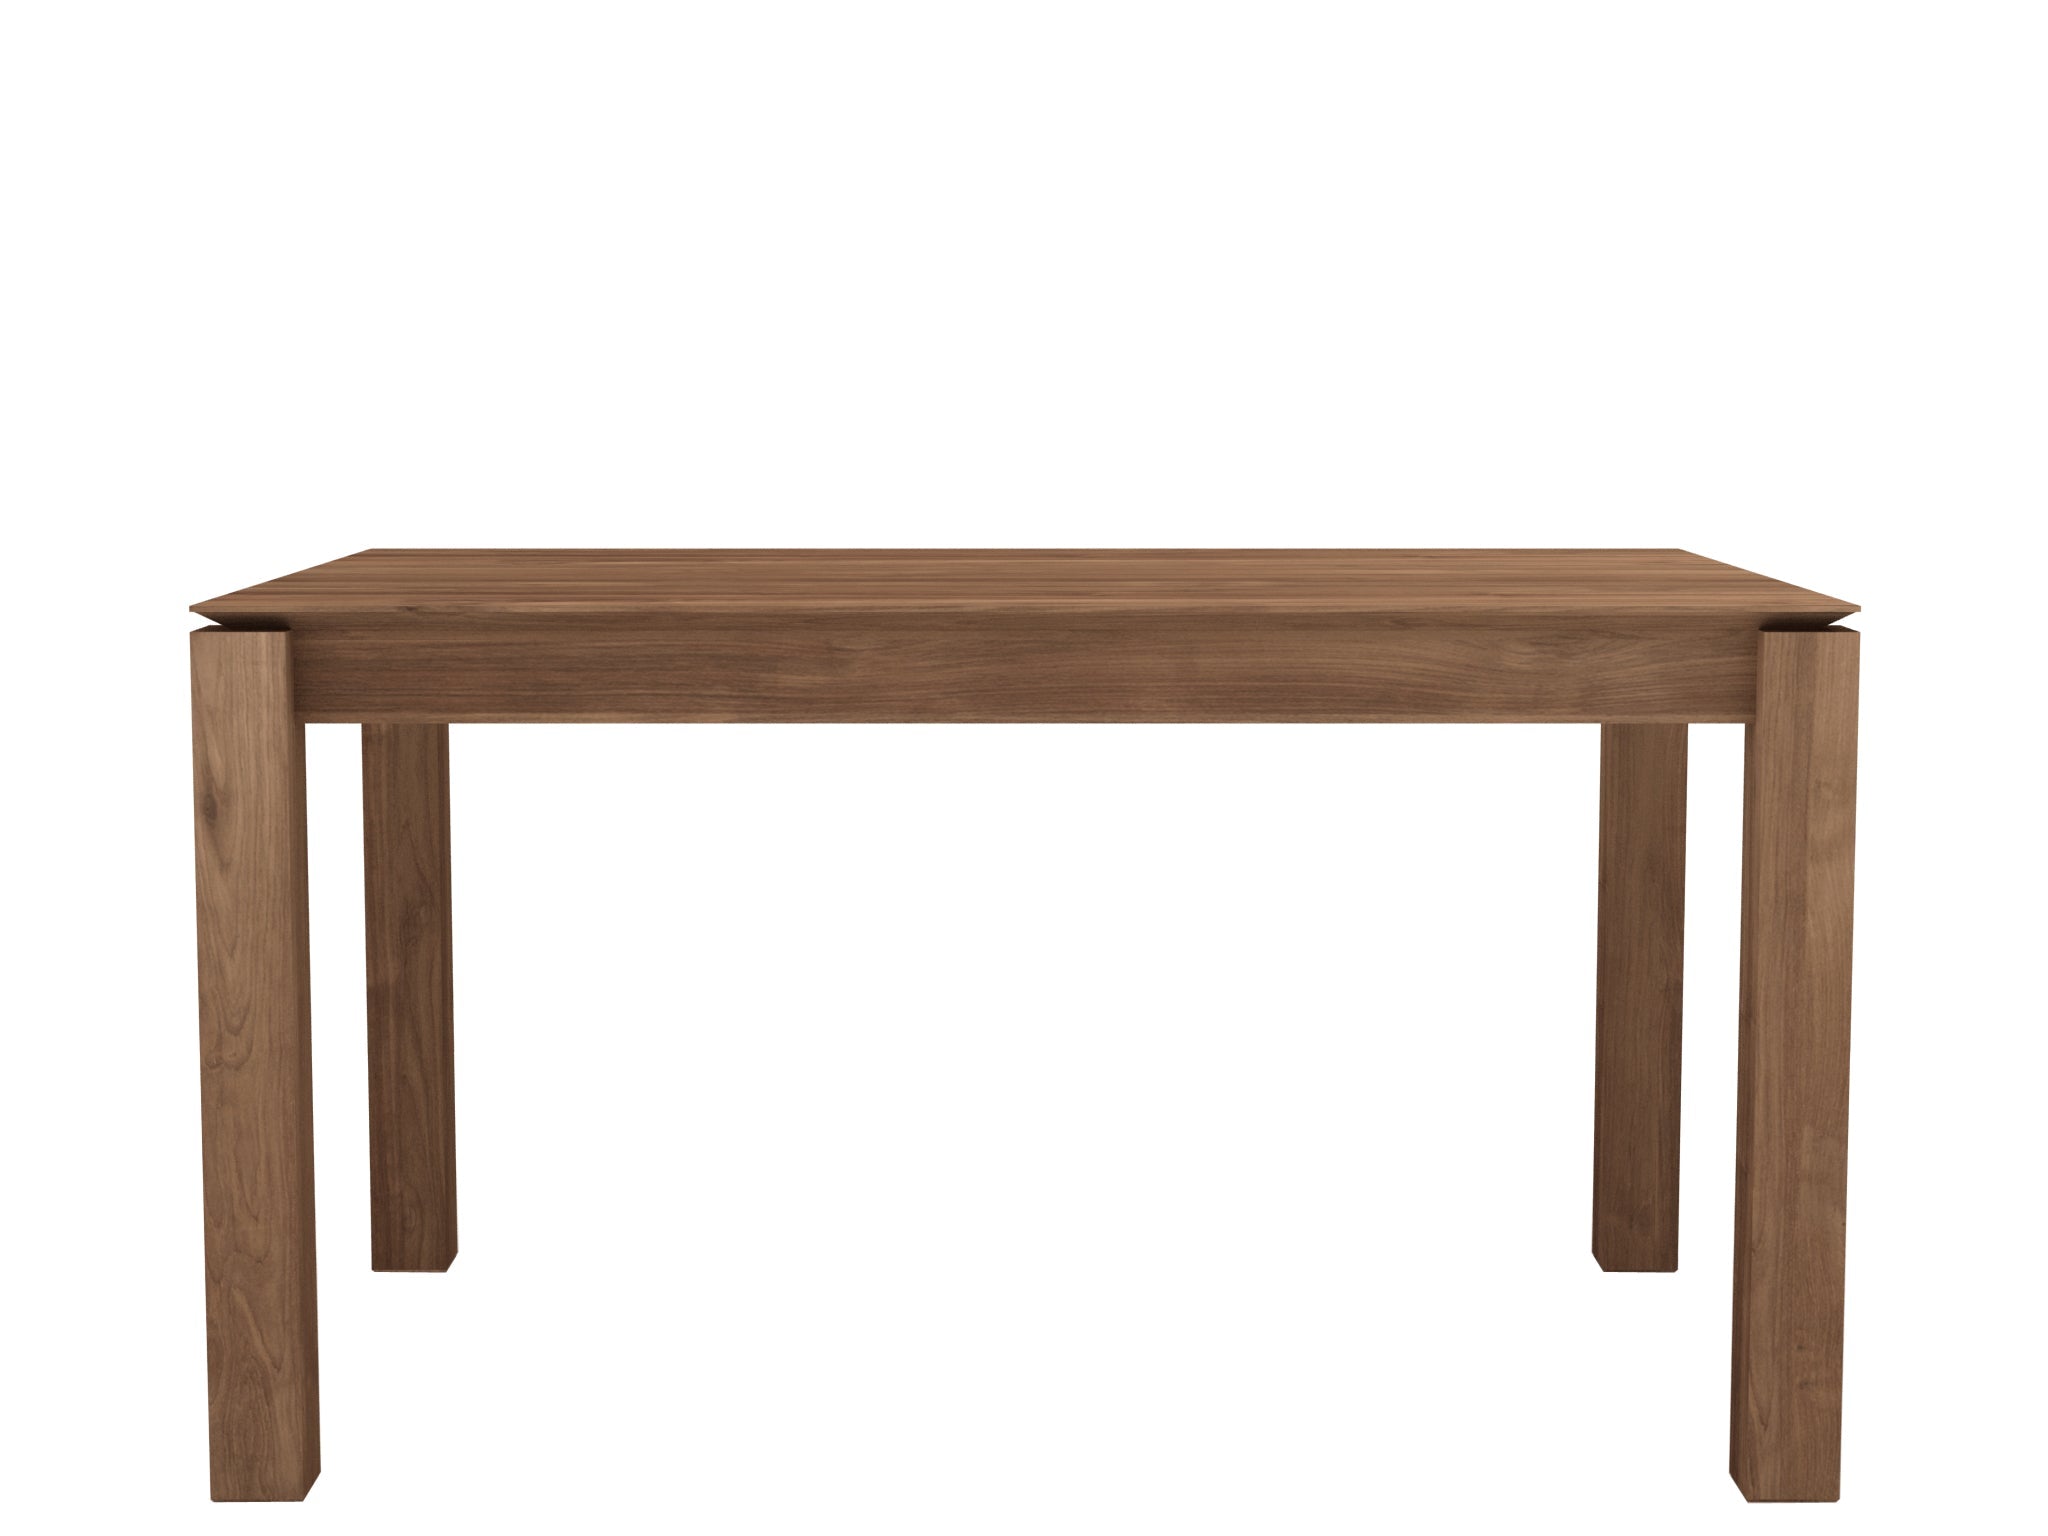  teak slice extendable dining table by ethnicraft at adorn.house